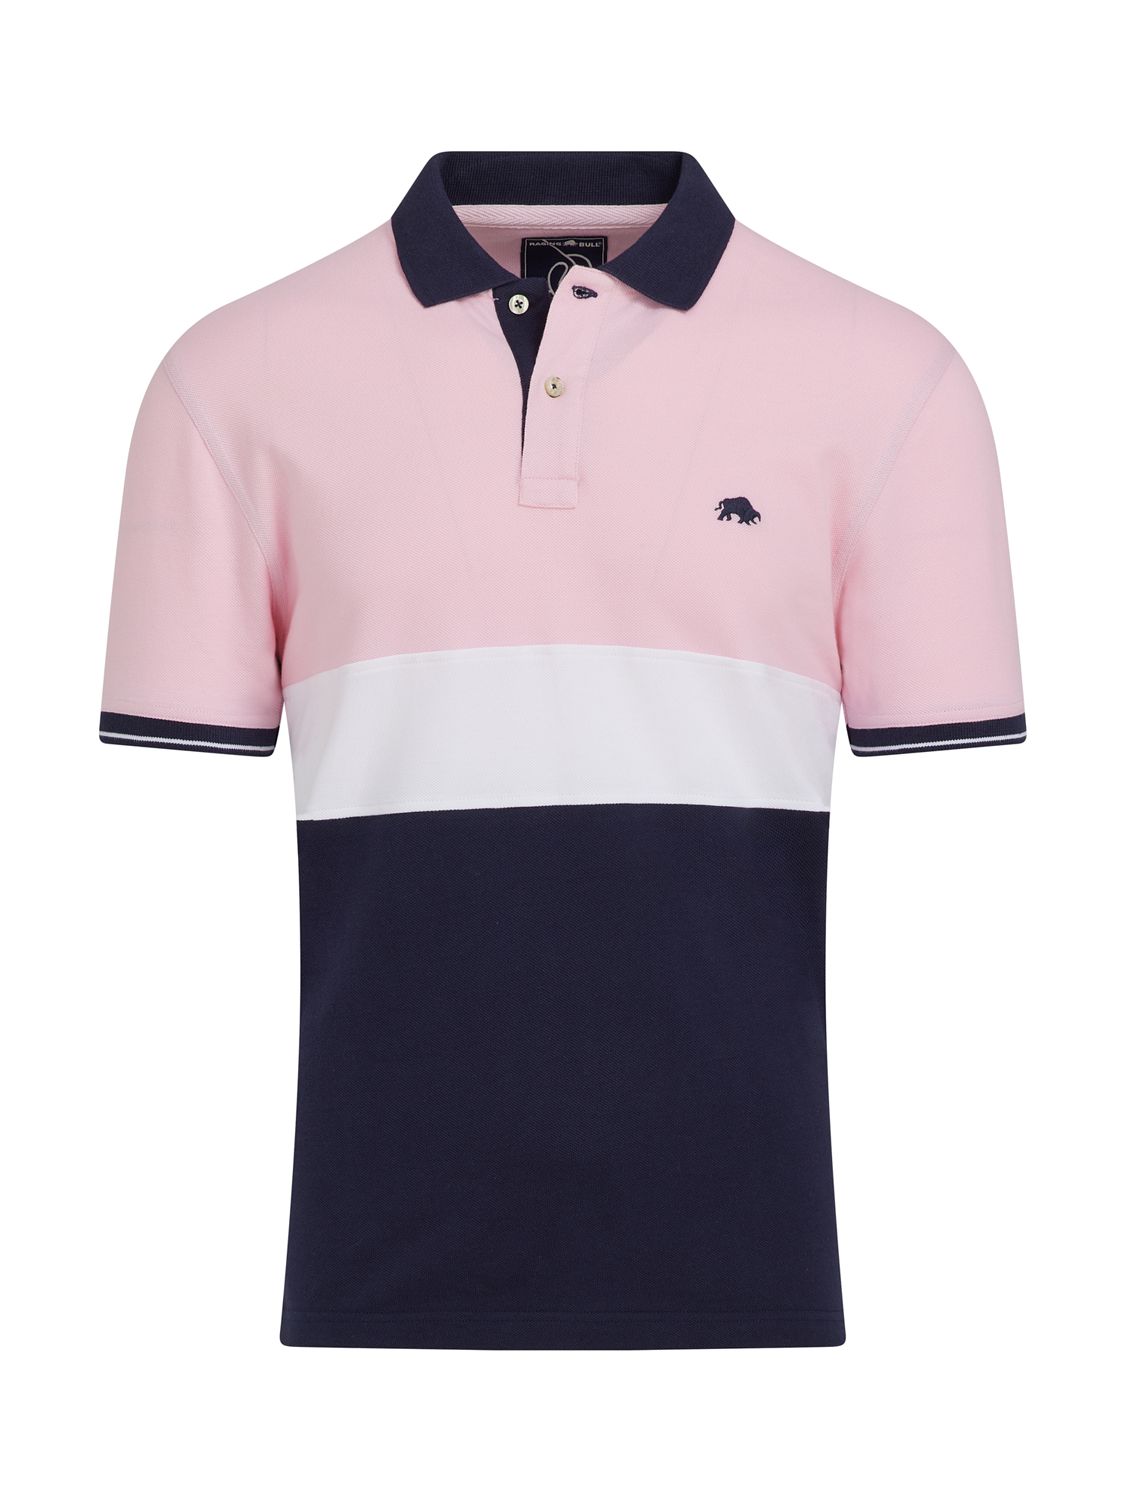 Buy Raging Bull Contrast Panel Pique Polo Shirt, Pink/Multi Online at johnlewis.com